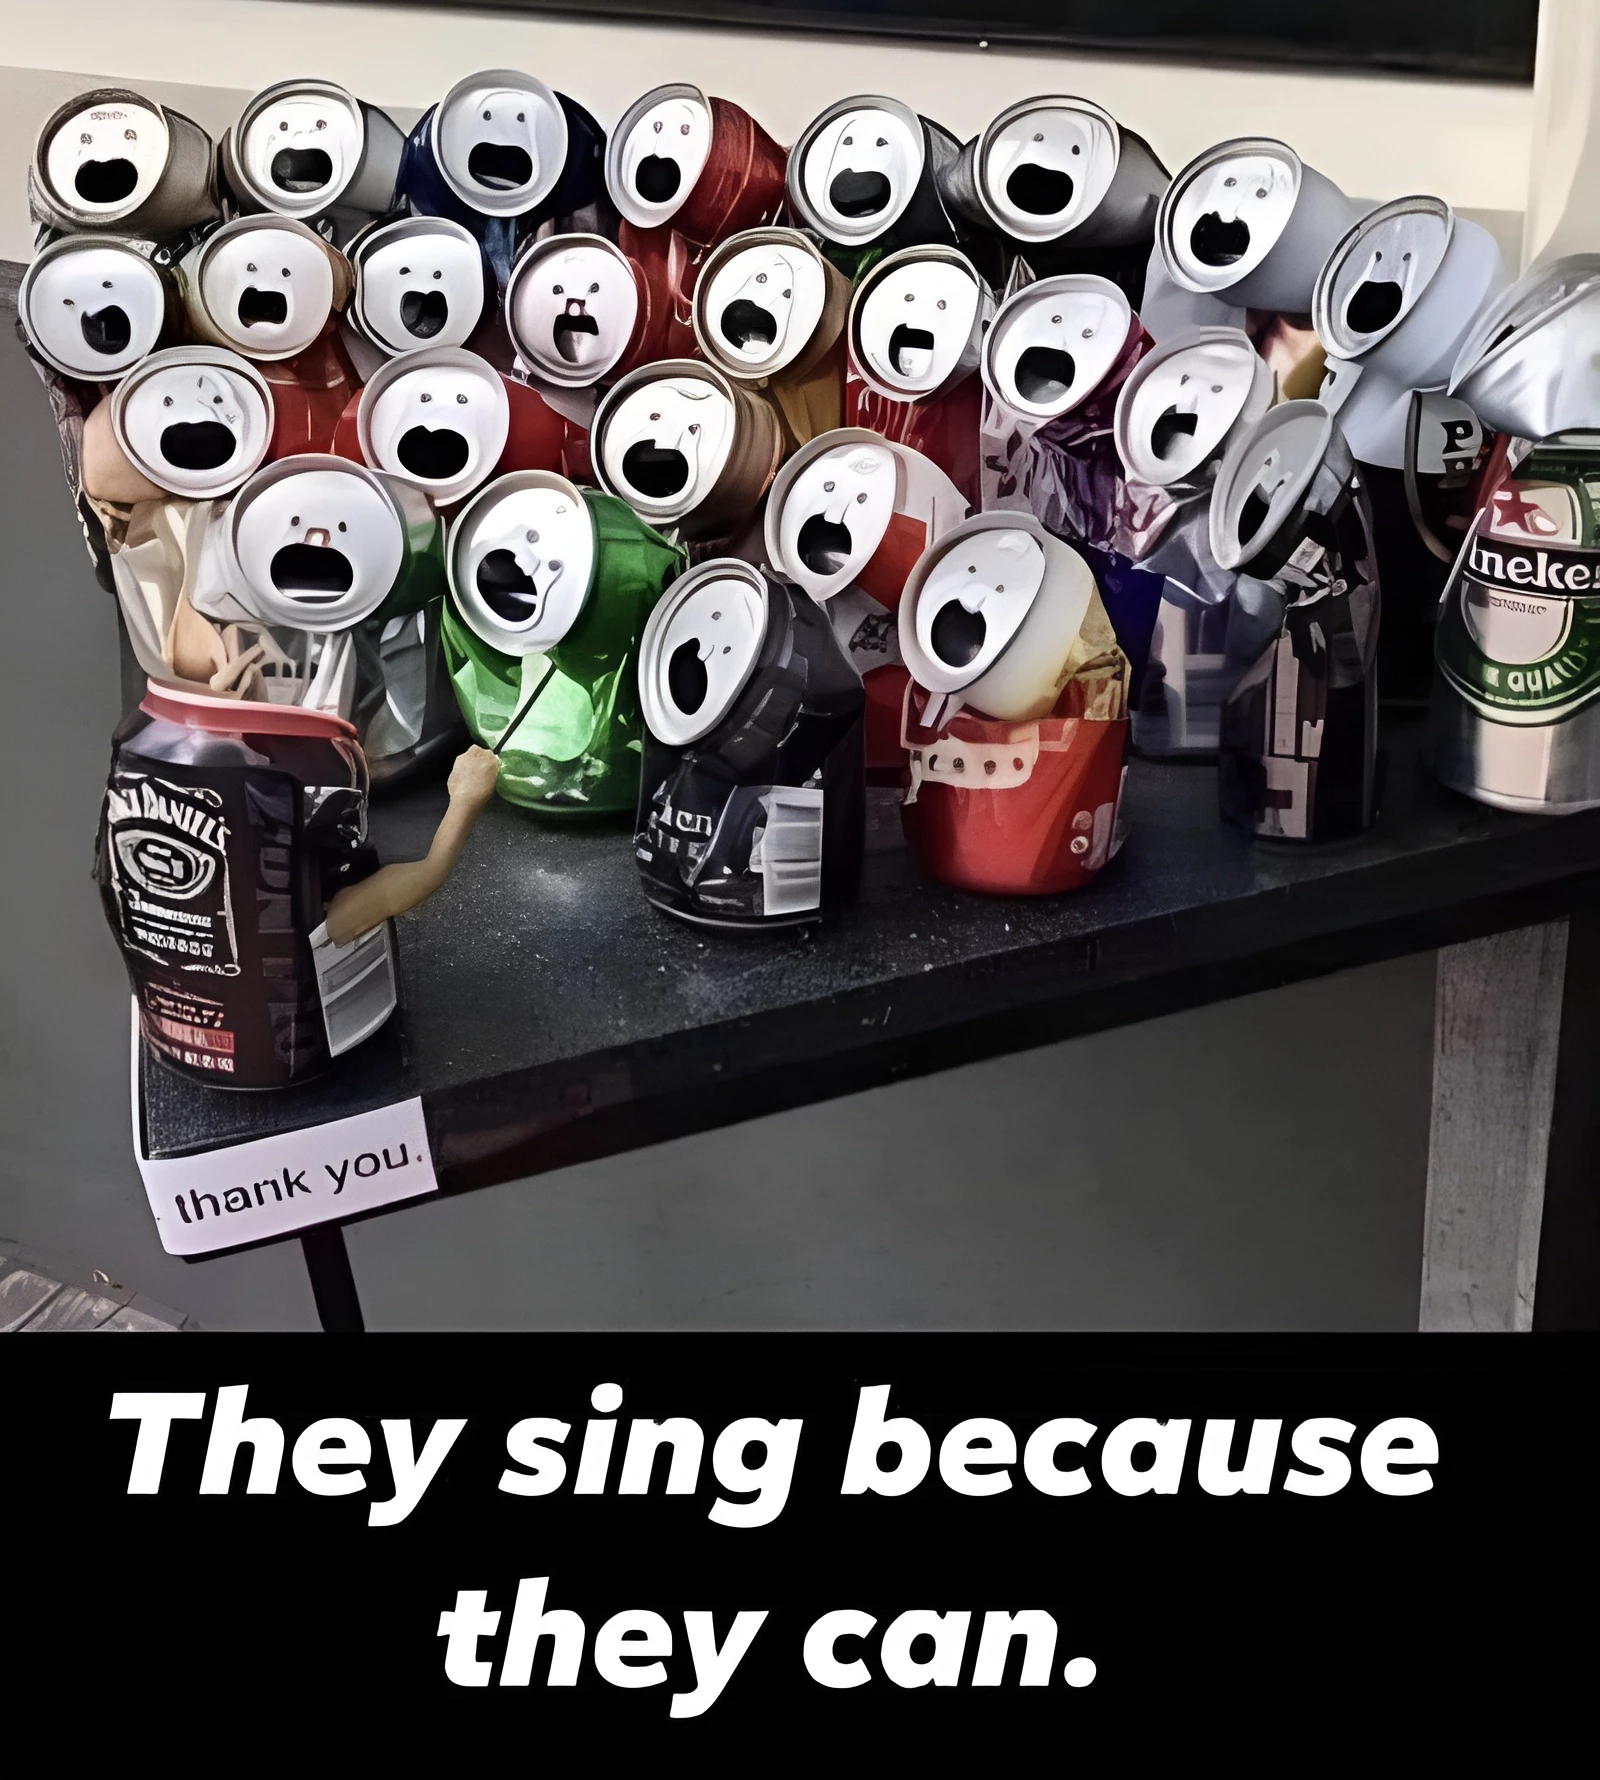 Is There Something These Cans Can’t Do?